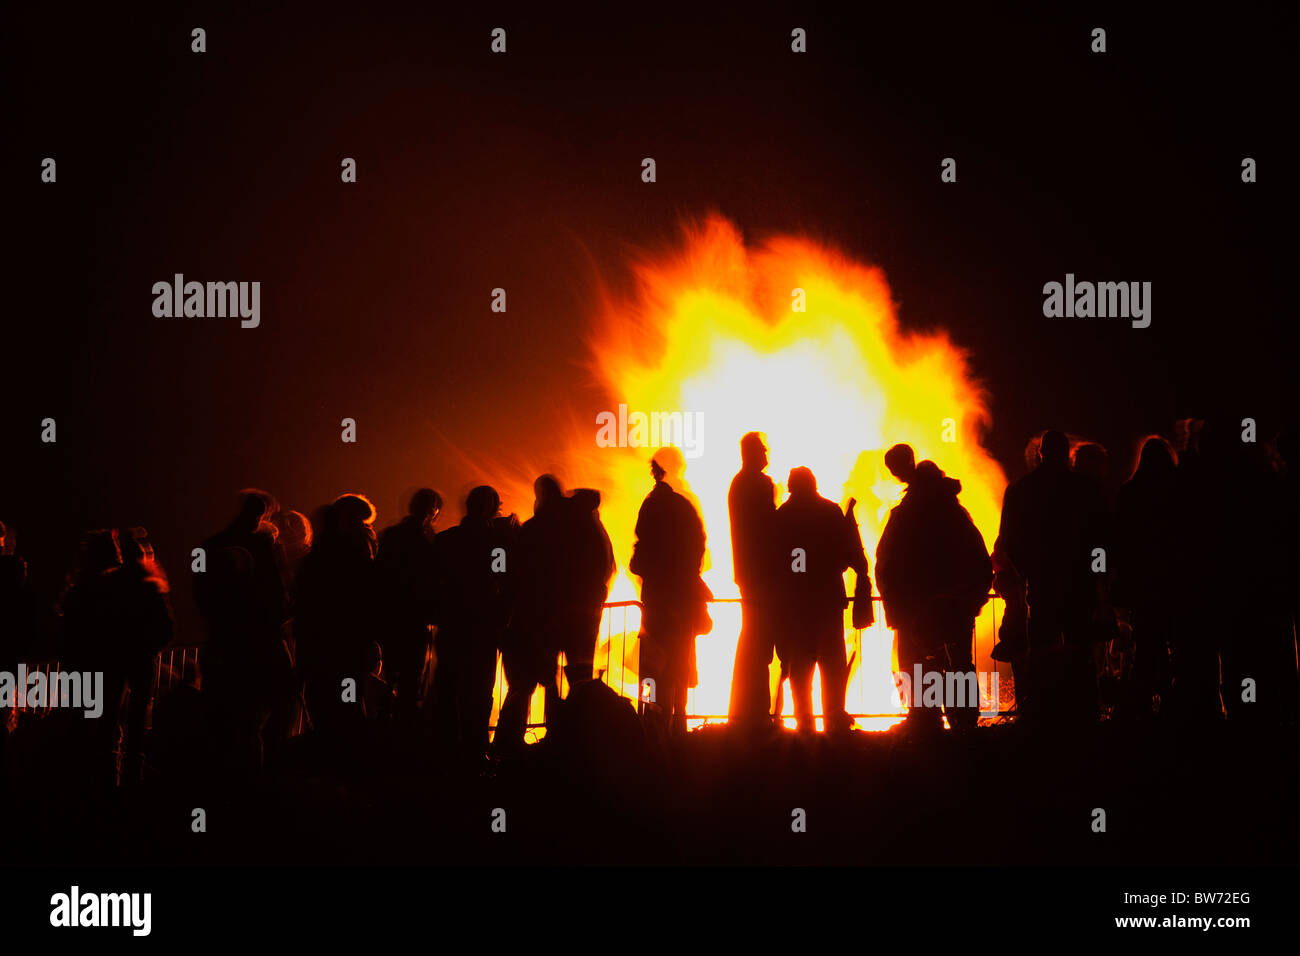 Festivals, Guy Fawkes, Bonfire, People silhouetted by flames from fire on the beach. Stock Photo